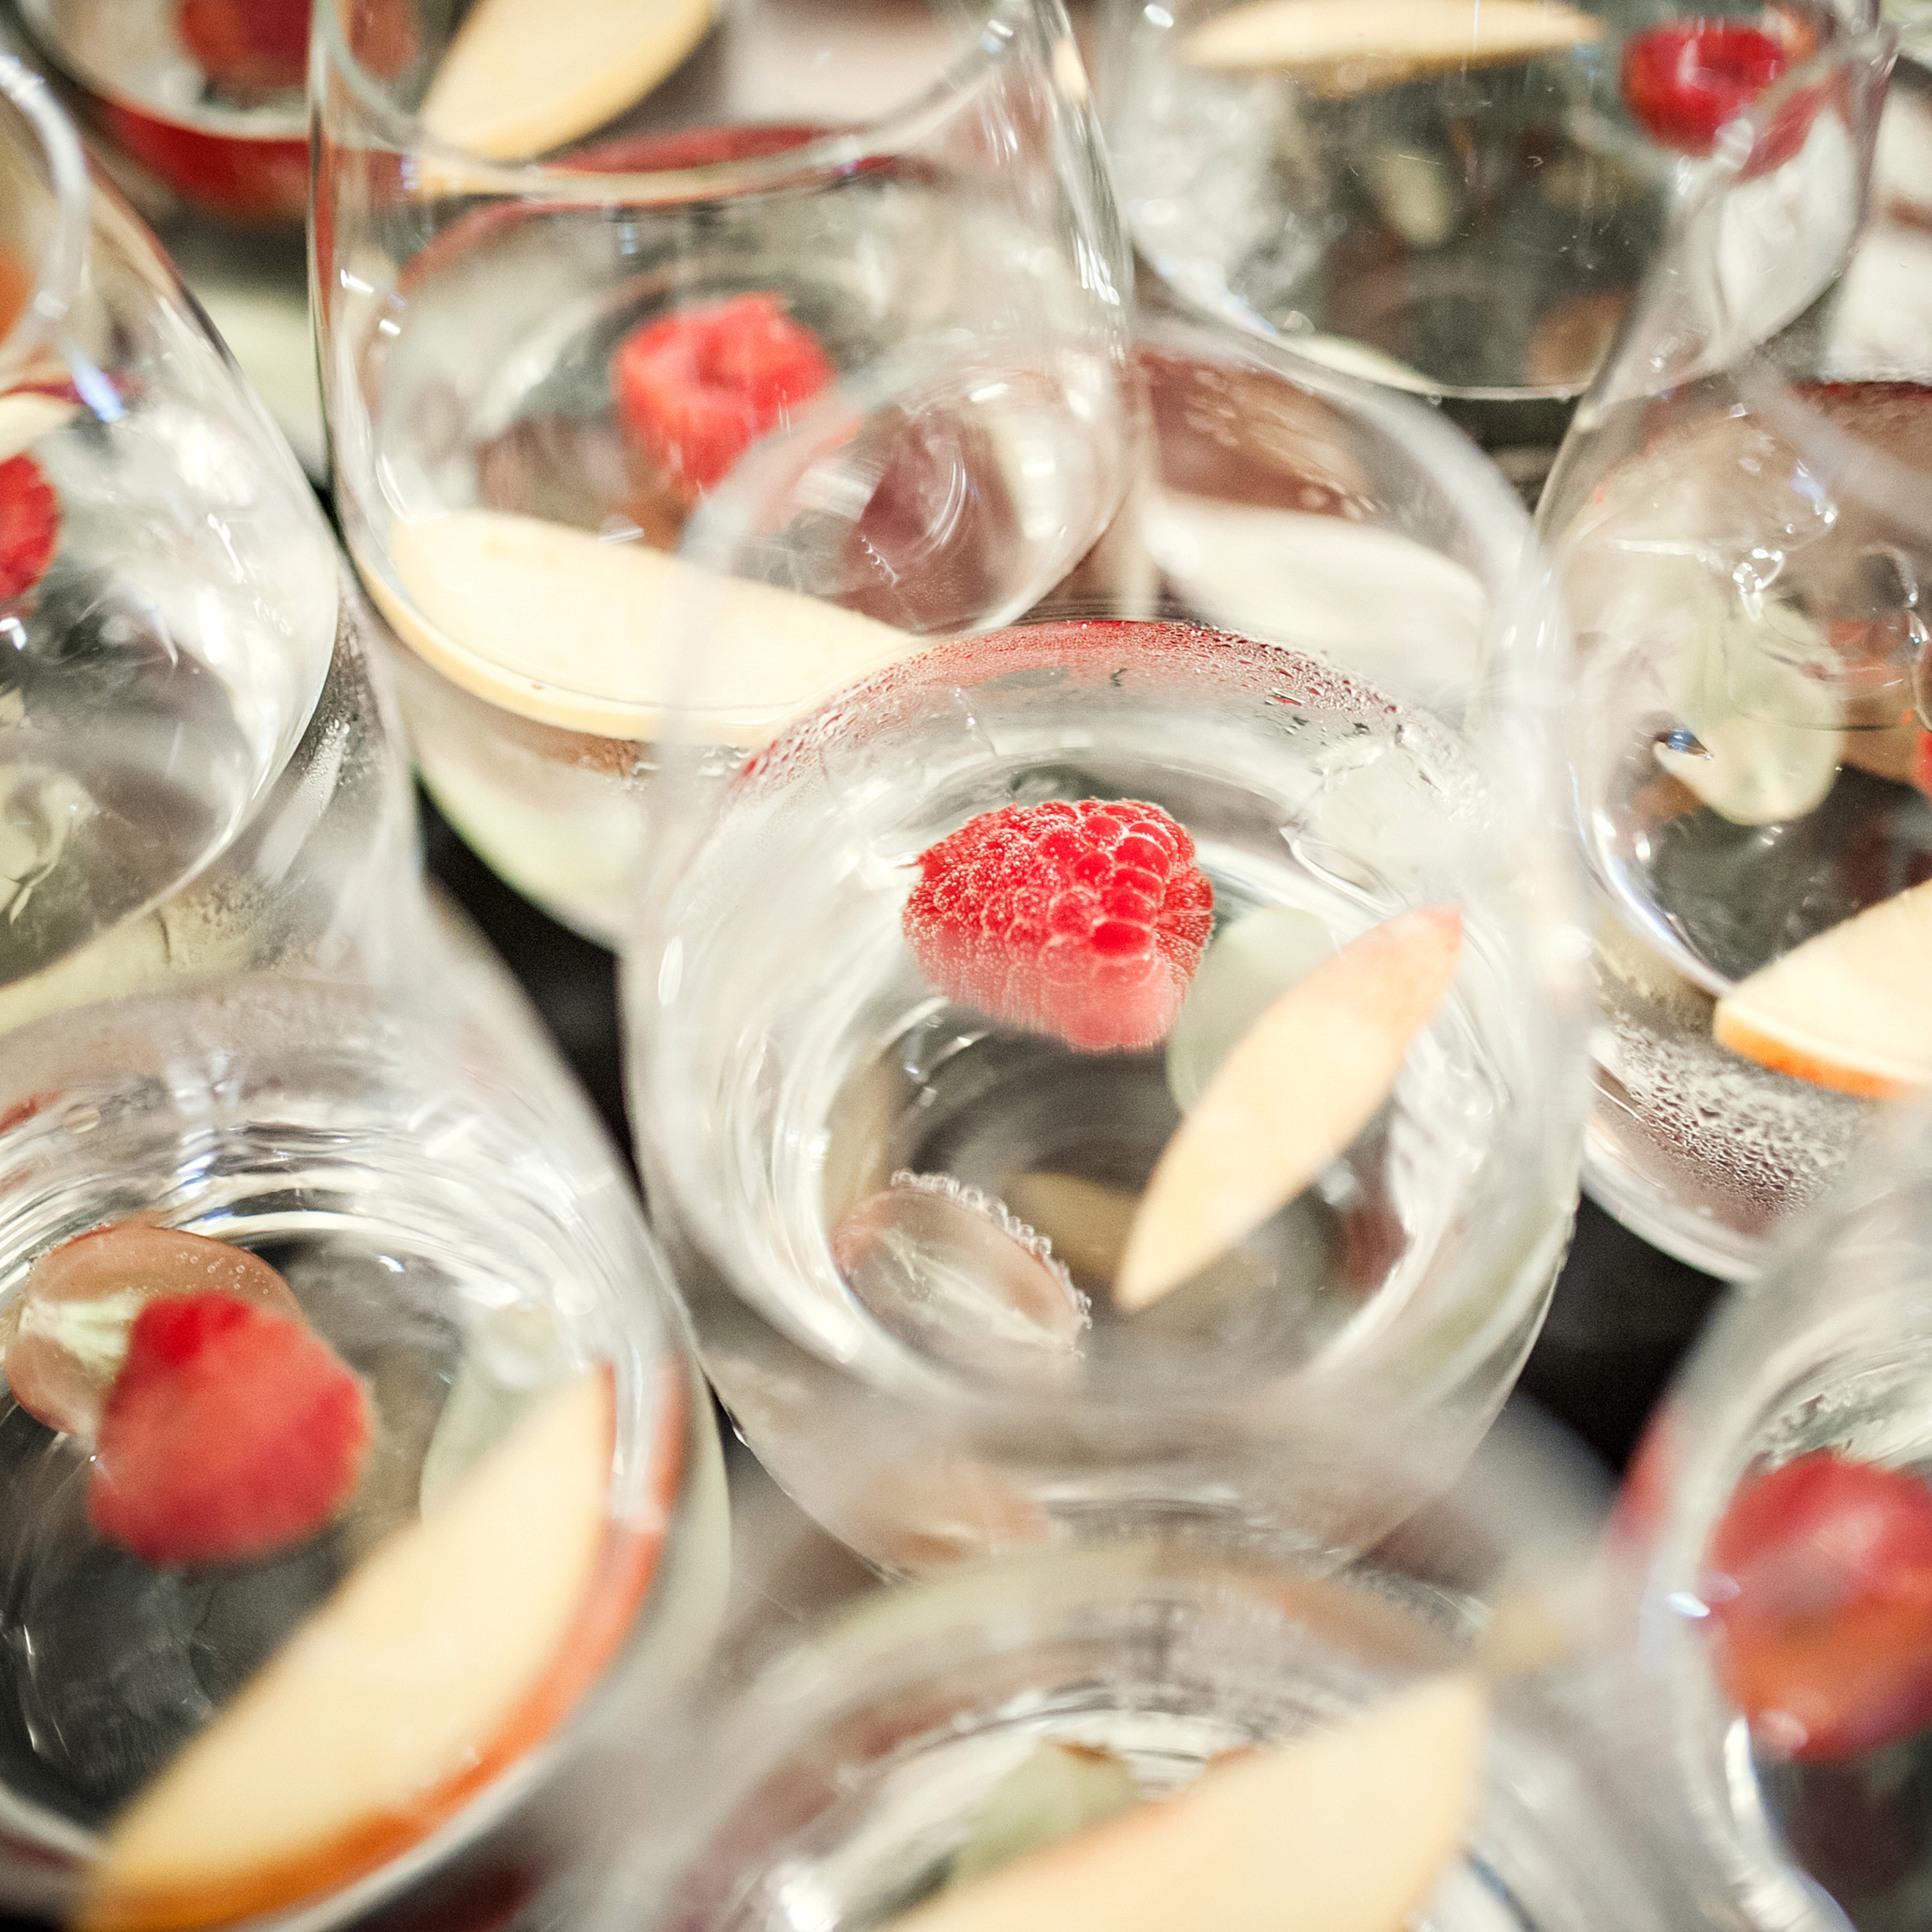 Impress your guests with your wedding reception drinks, Wedding details to impress guests, signature wedding drinks